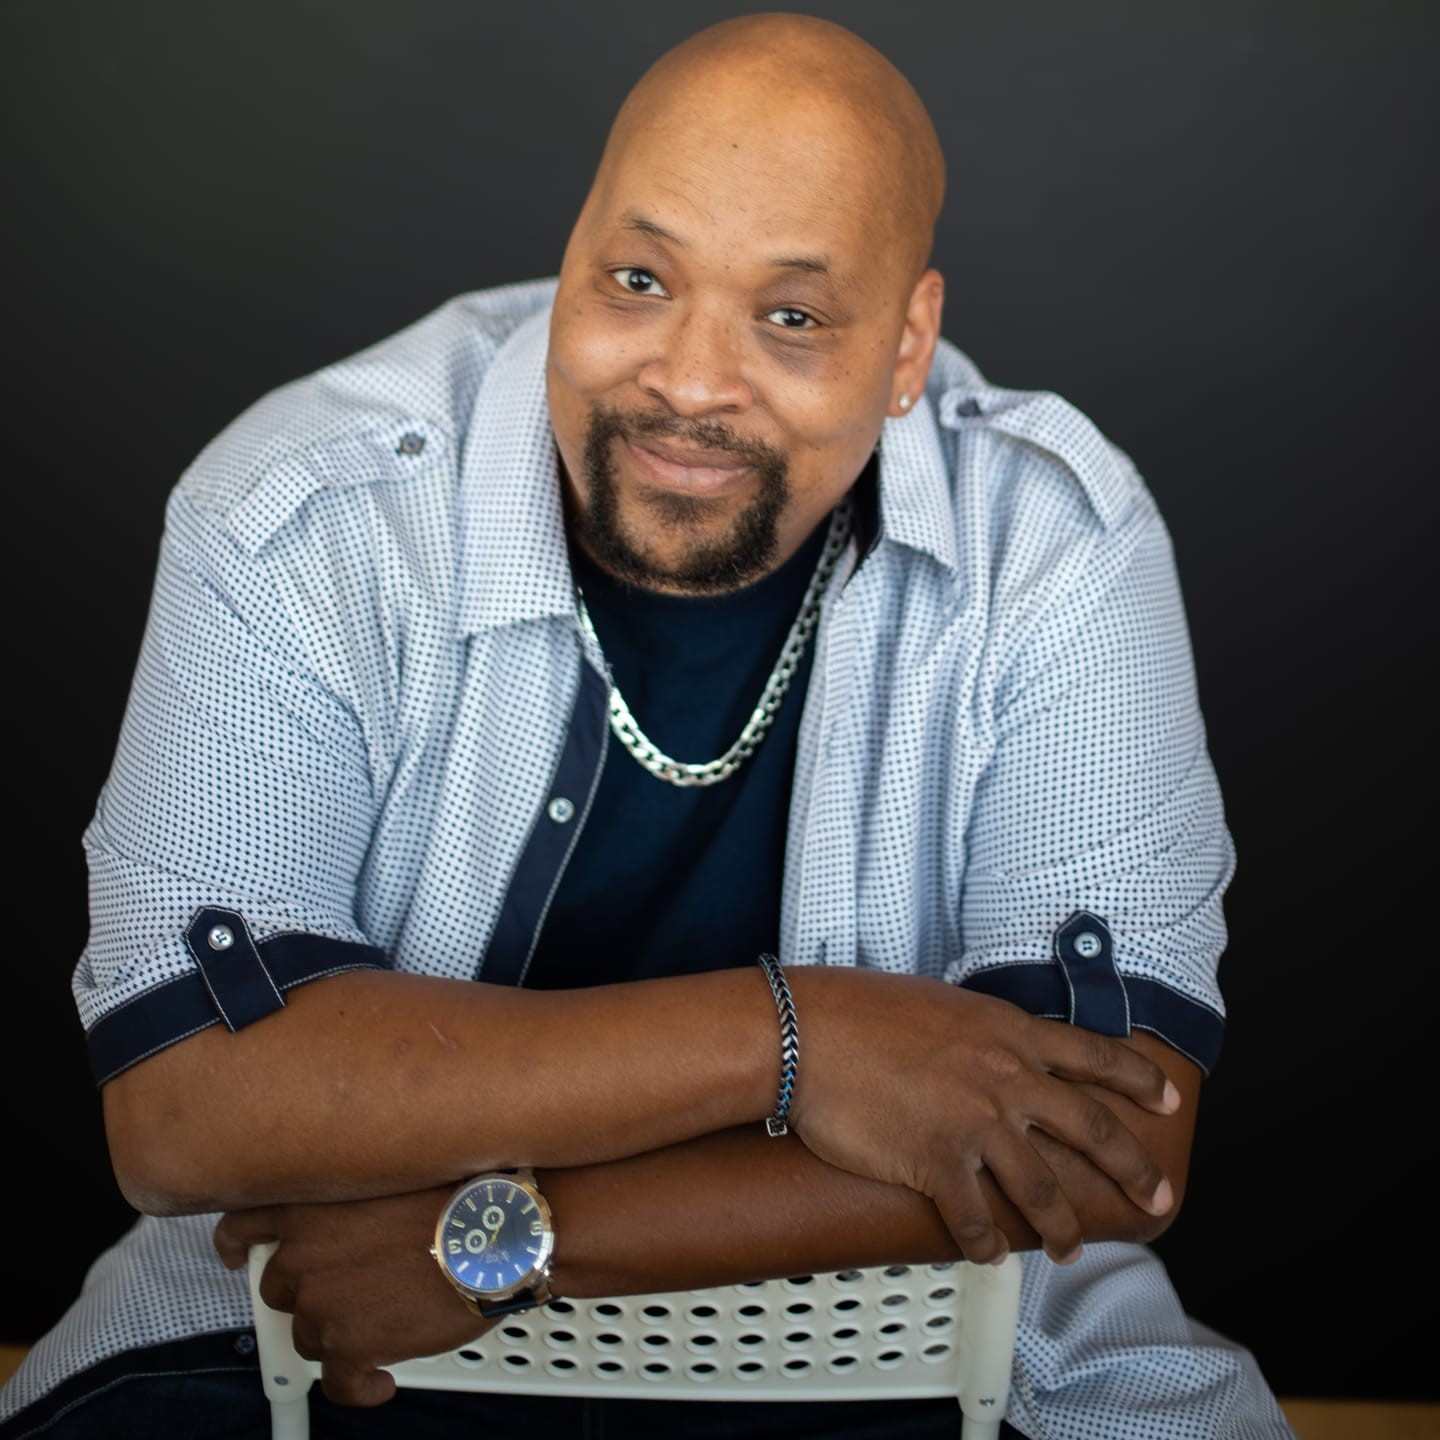 Milton Wyley - Thur. 8:00PM Show Funny Stop Comedy Club on Jun 20, 20:00@Funny Stop Comedy Club - Buy tickets and Get information on Funny Stop funnystop.online